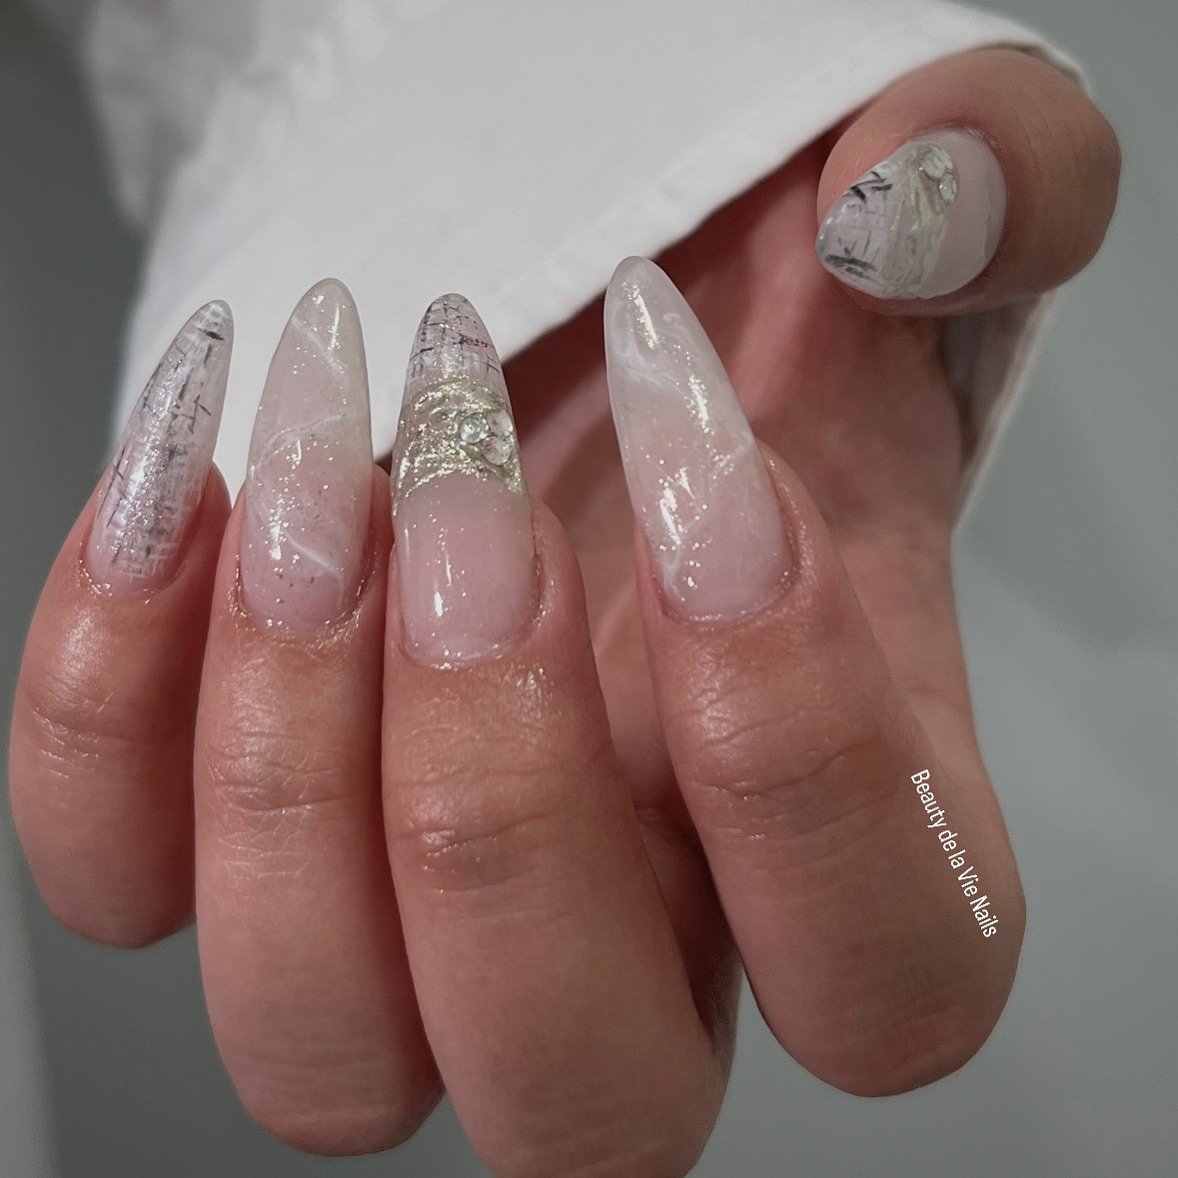 Checkout this fresh beautiful marble set! At Beauty de la Vie Nails, we take pride in ensuring you leave our salon with the most beautiful nails that you&rsquo;re happy with! 🥰 Come by soon and show us any designs you would like.

🤍OUR 20% GRAND OP